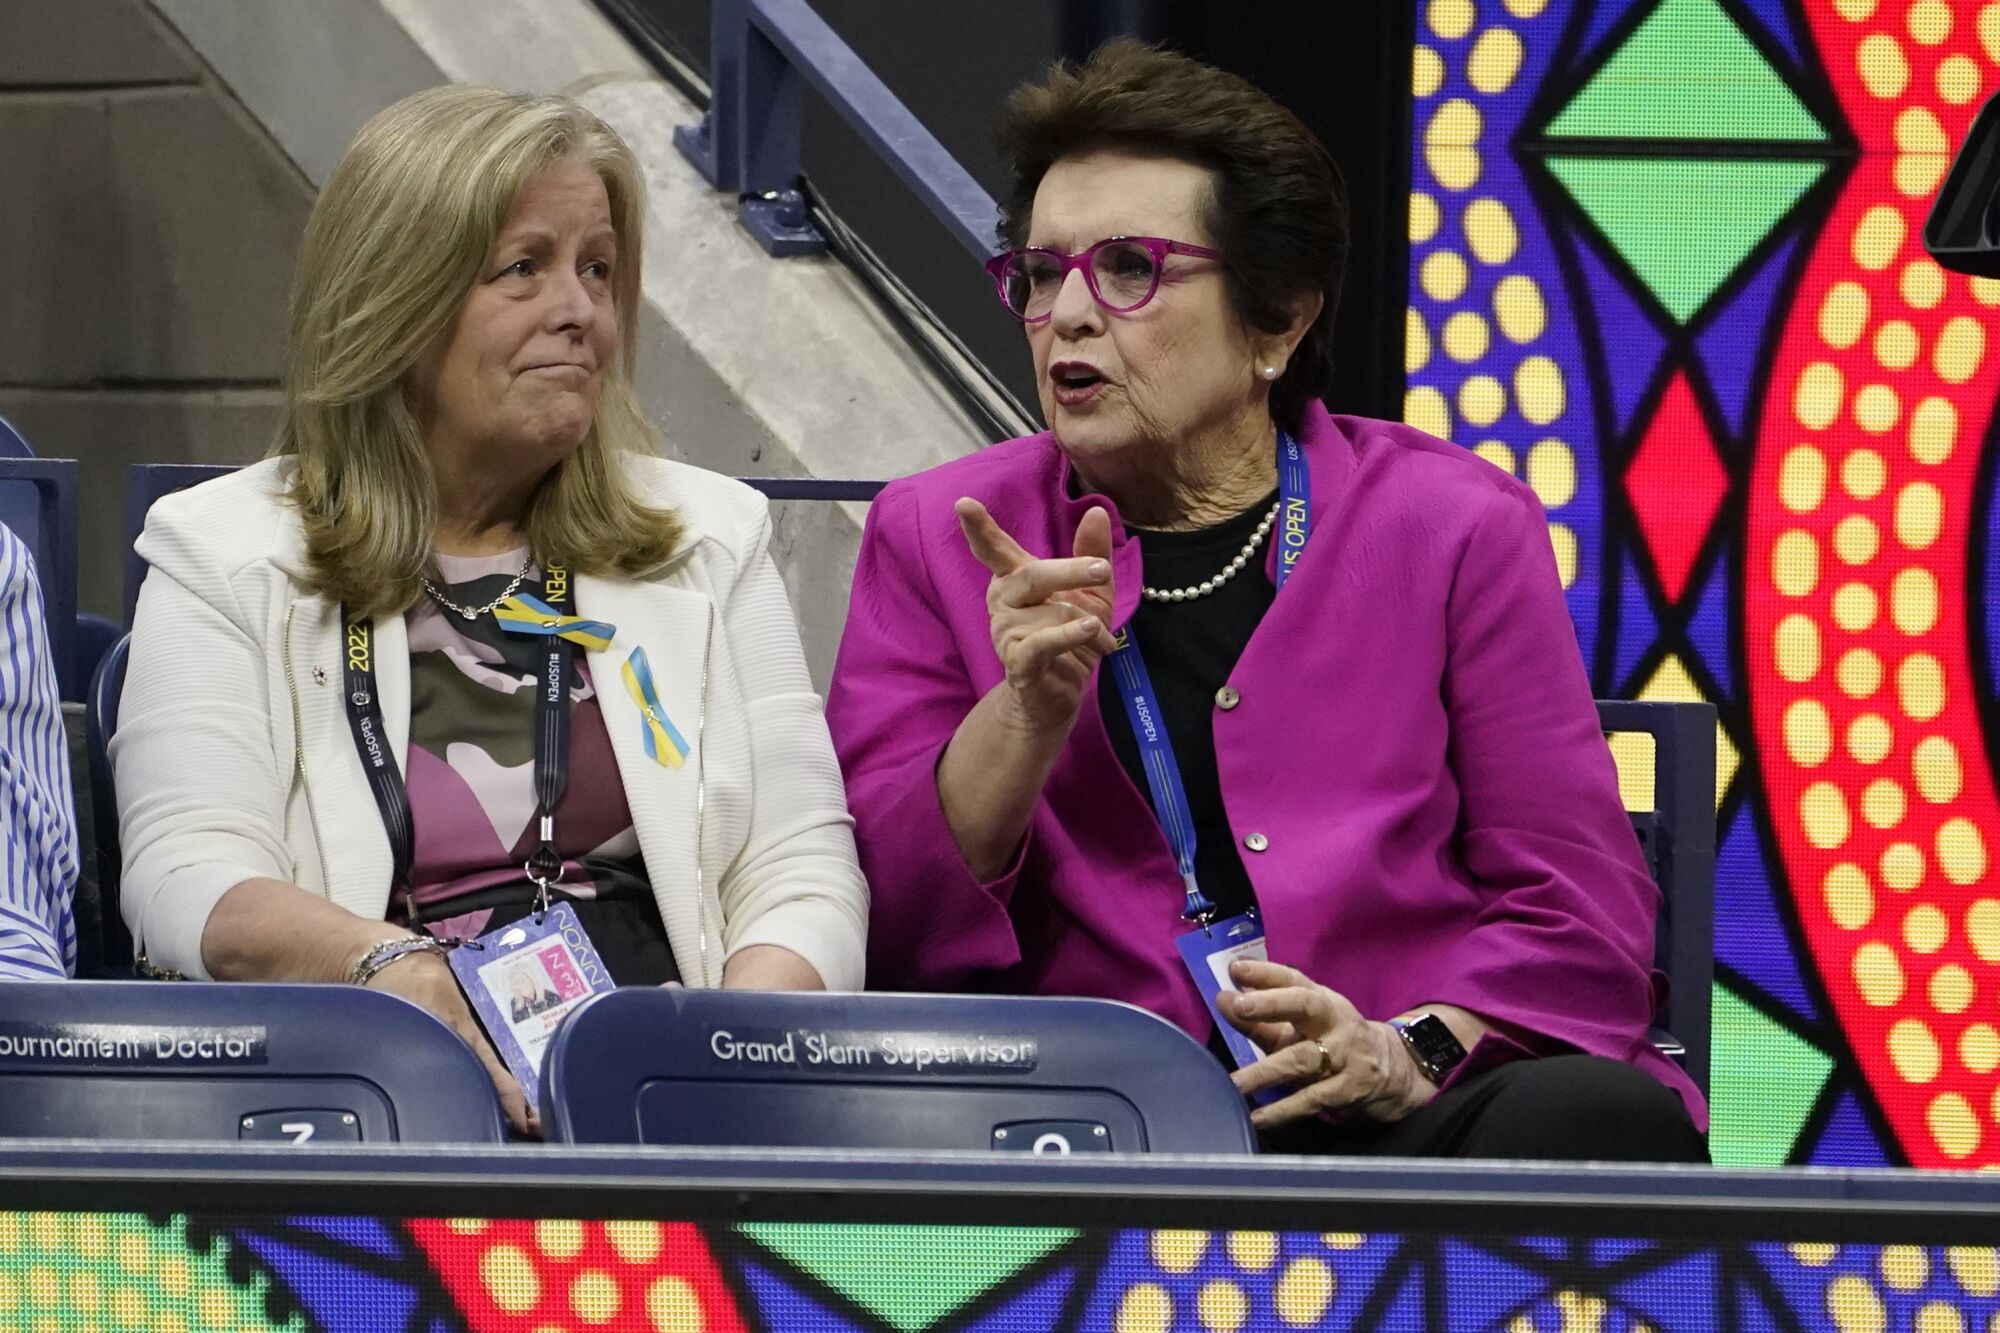 Billie Jean King sits in the stands during a match between Serena Williams and Anett Kontaveit.